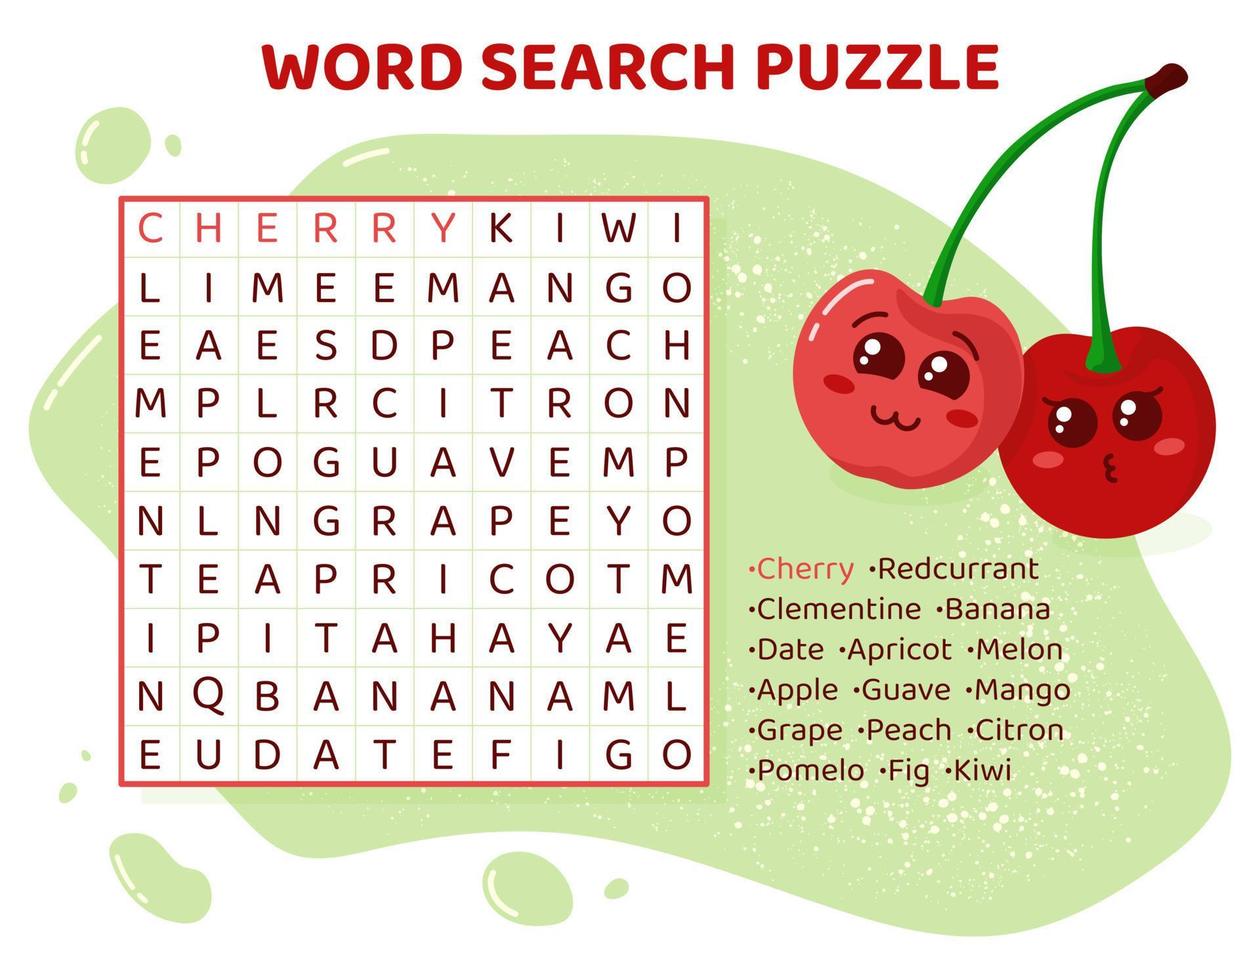 Word search puzzle with fruits and berries. Education game for children. Learning English language. Cartoon spelling puzzle. Test for kids Crossword book. Vector illustration.